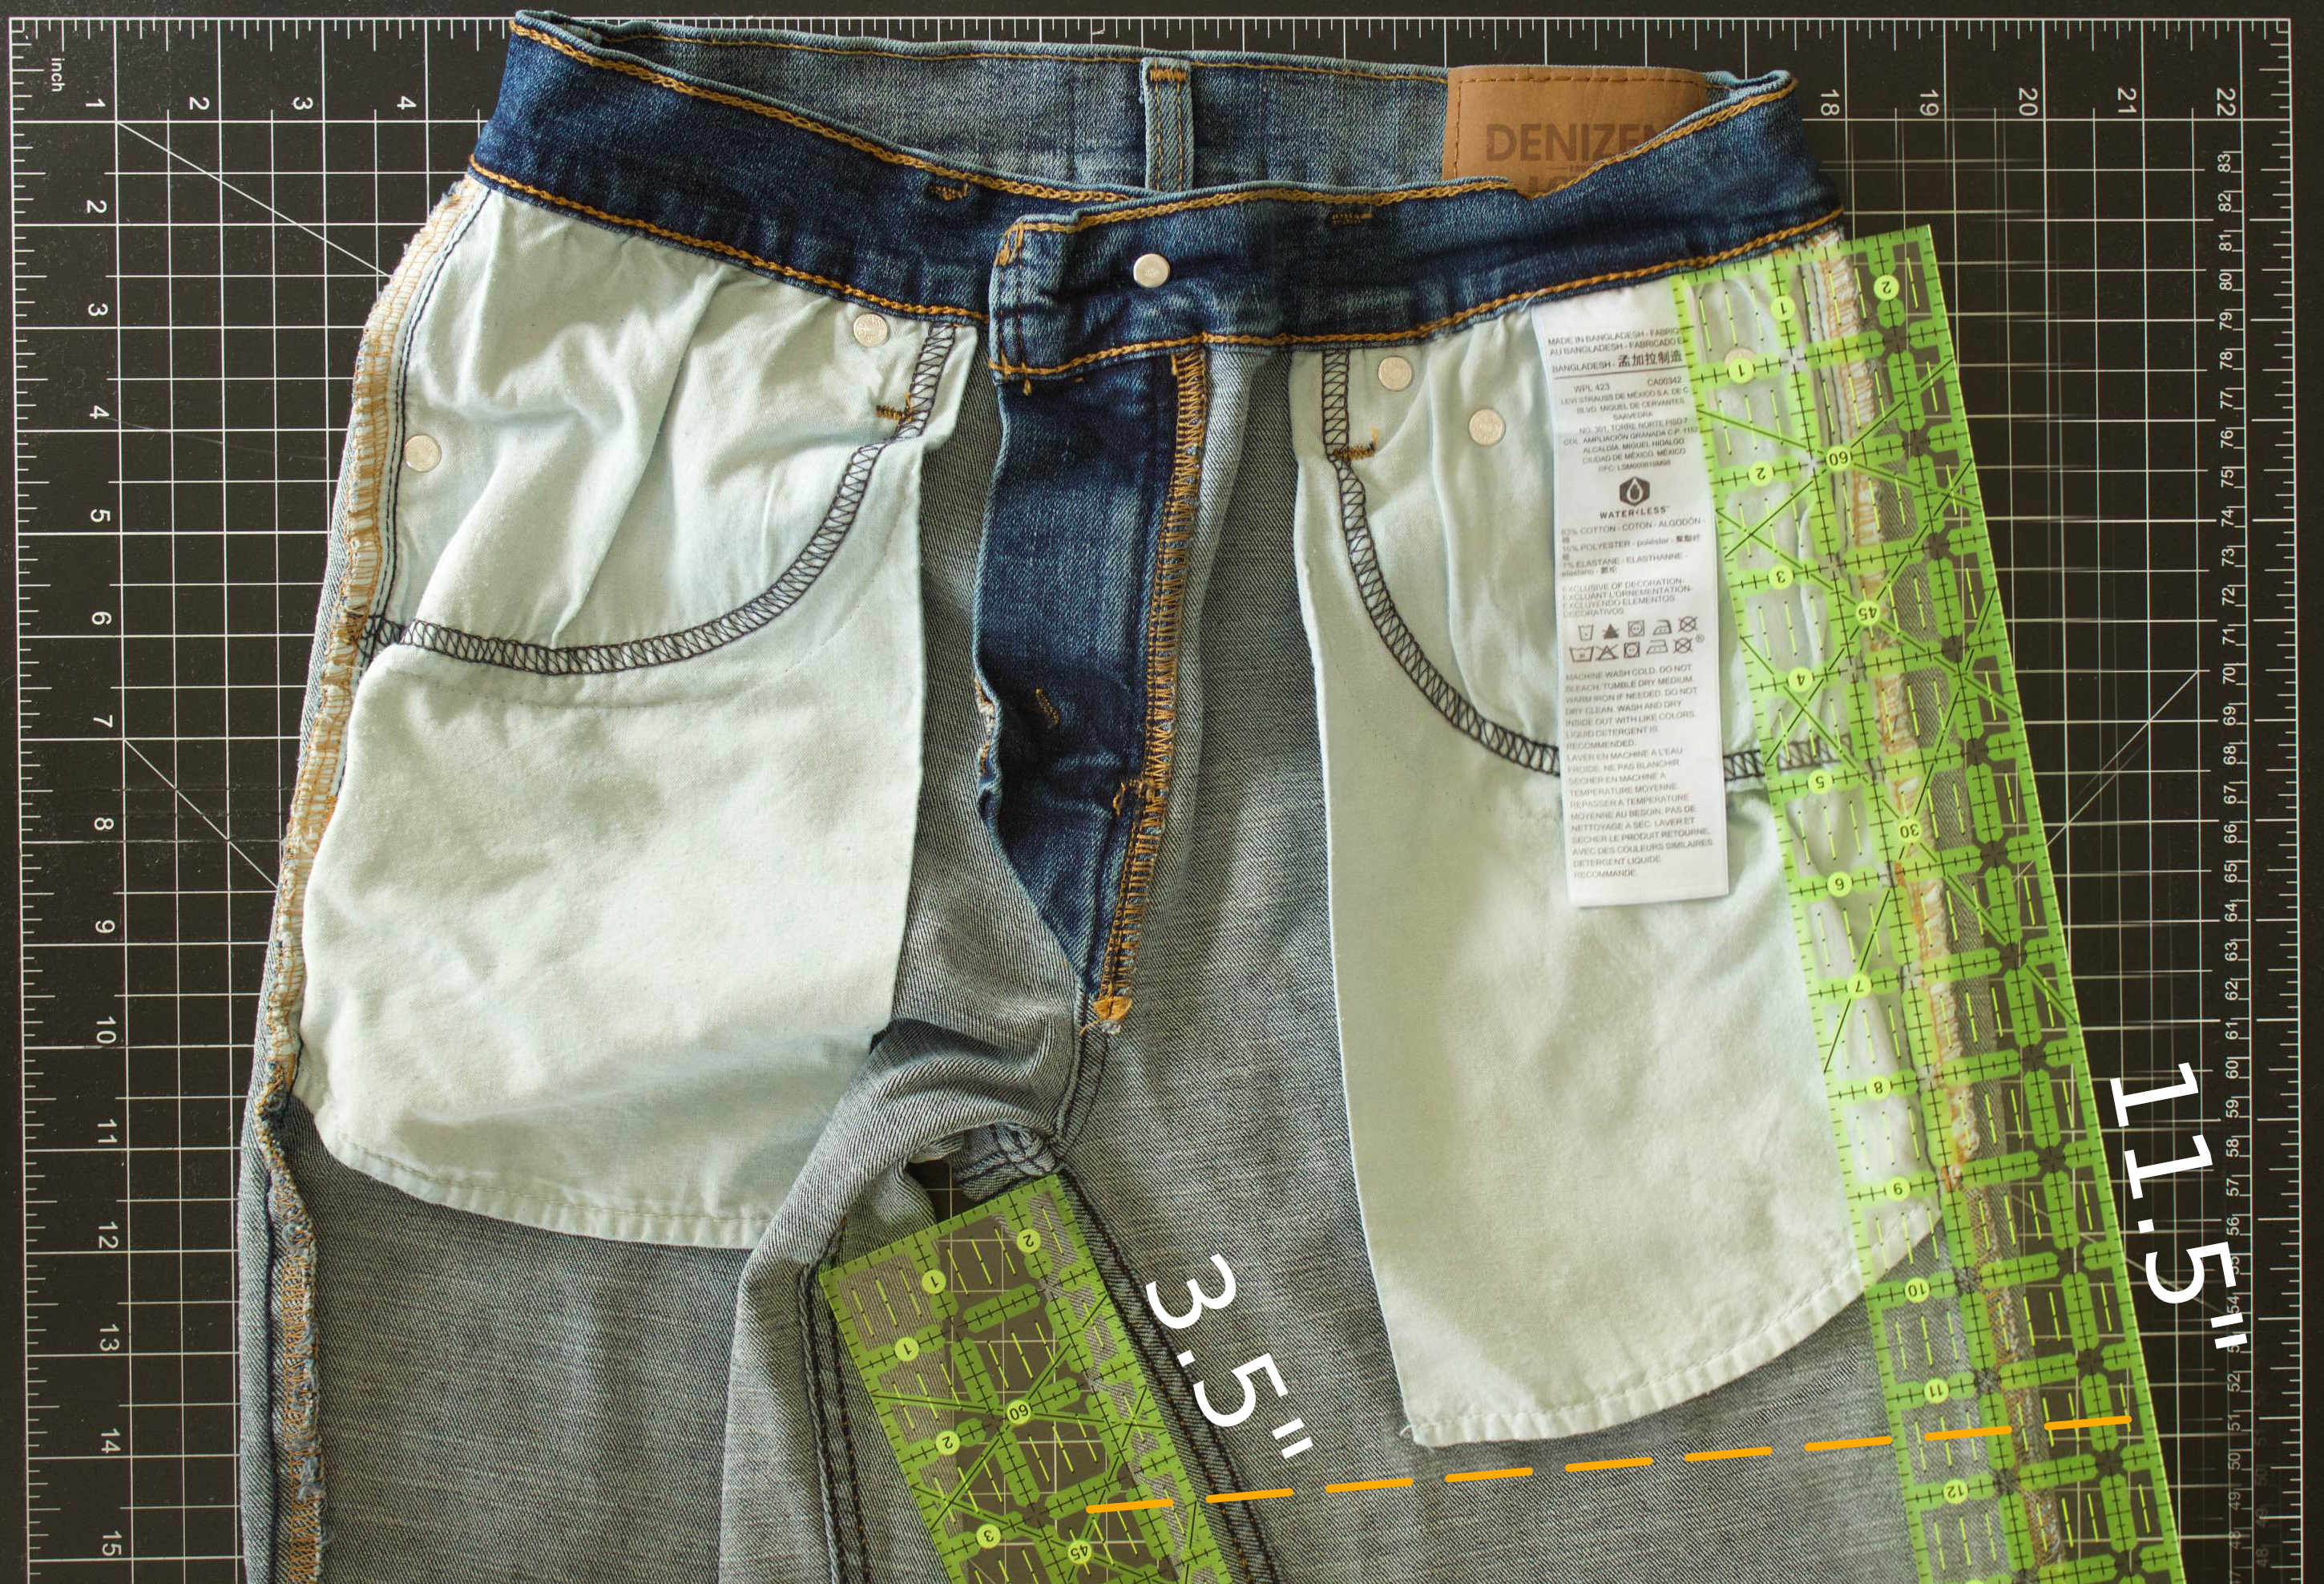 Annotated photo of the upper portion of the jeans showing the 3.5-inch and 11.5-inch measurements.